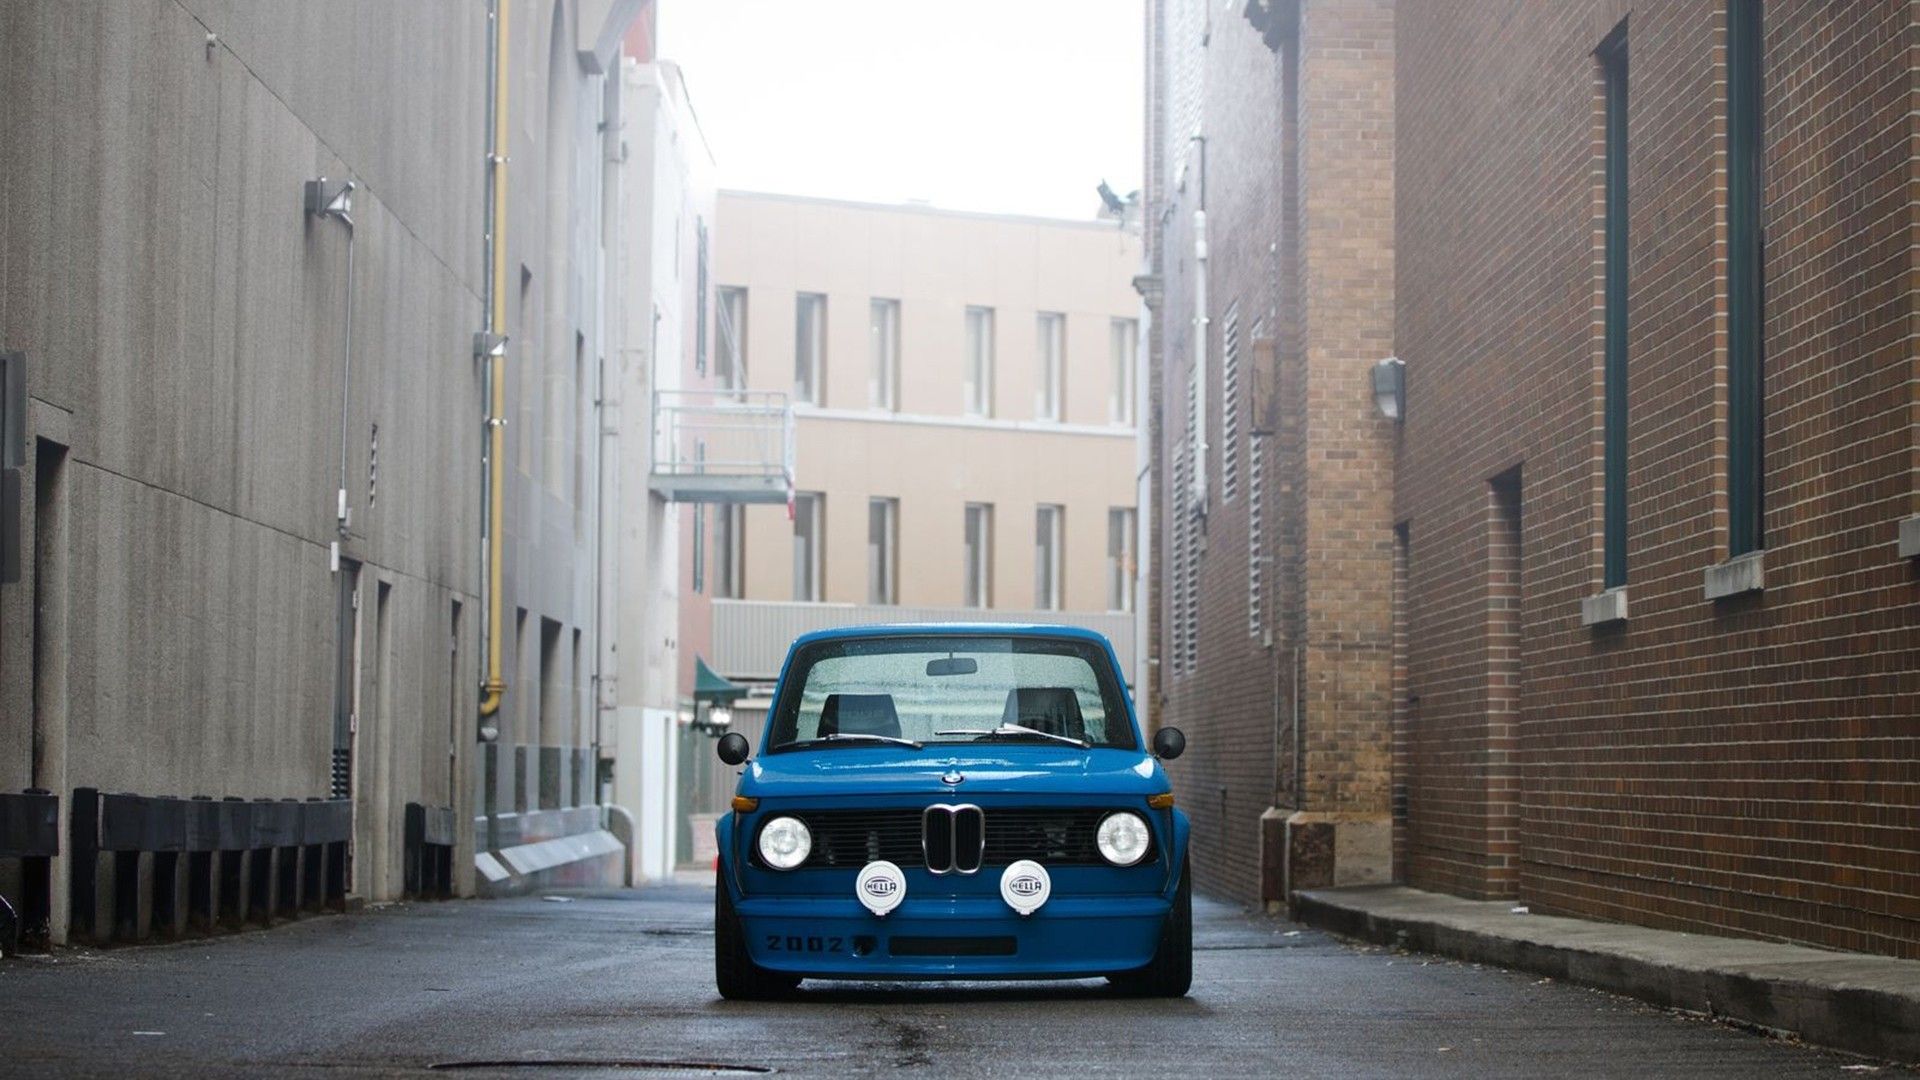 Free download BMW old cars BMW 2002 classic car Wallpaper